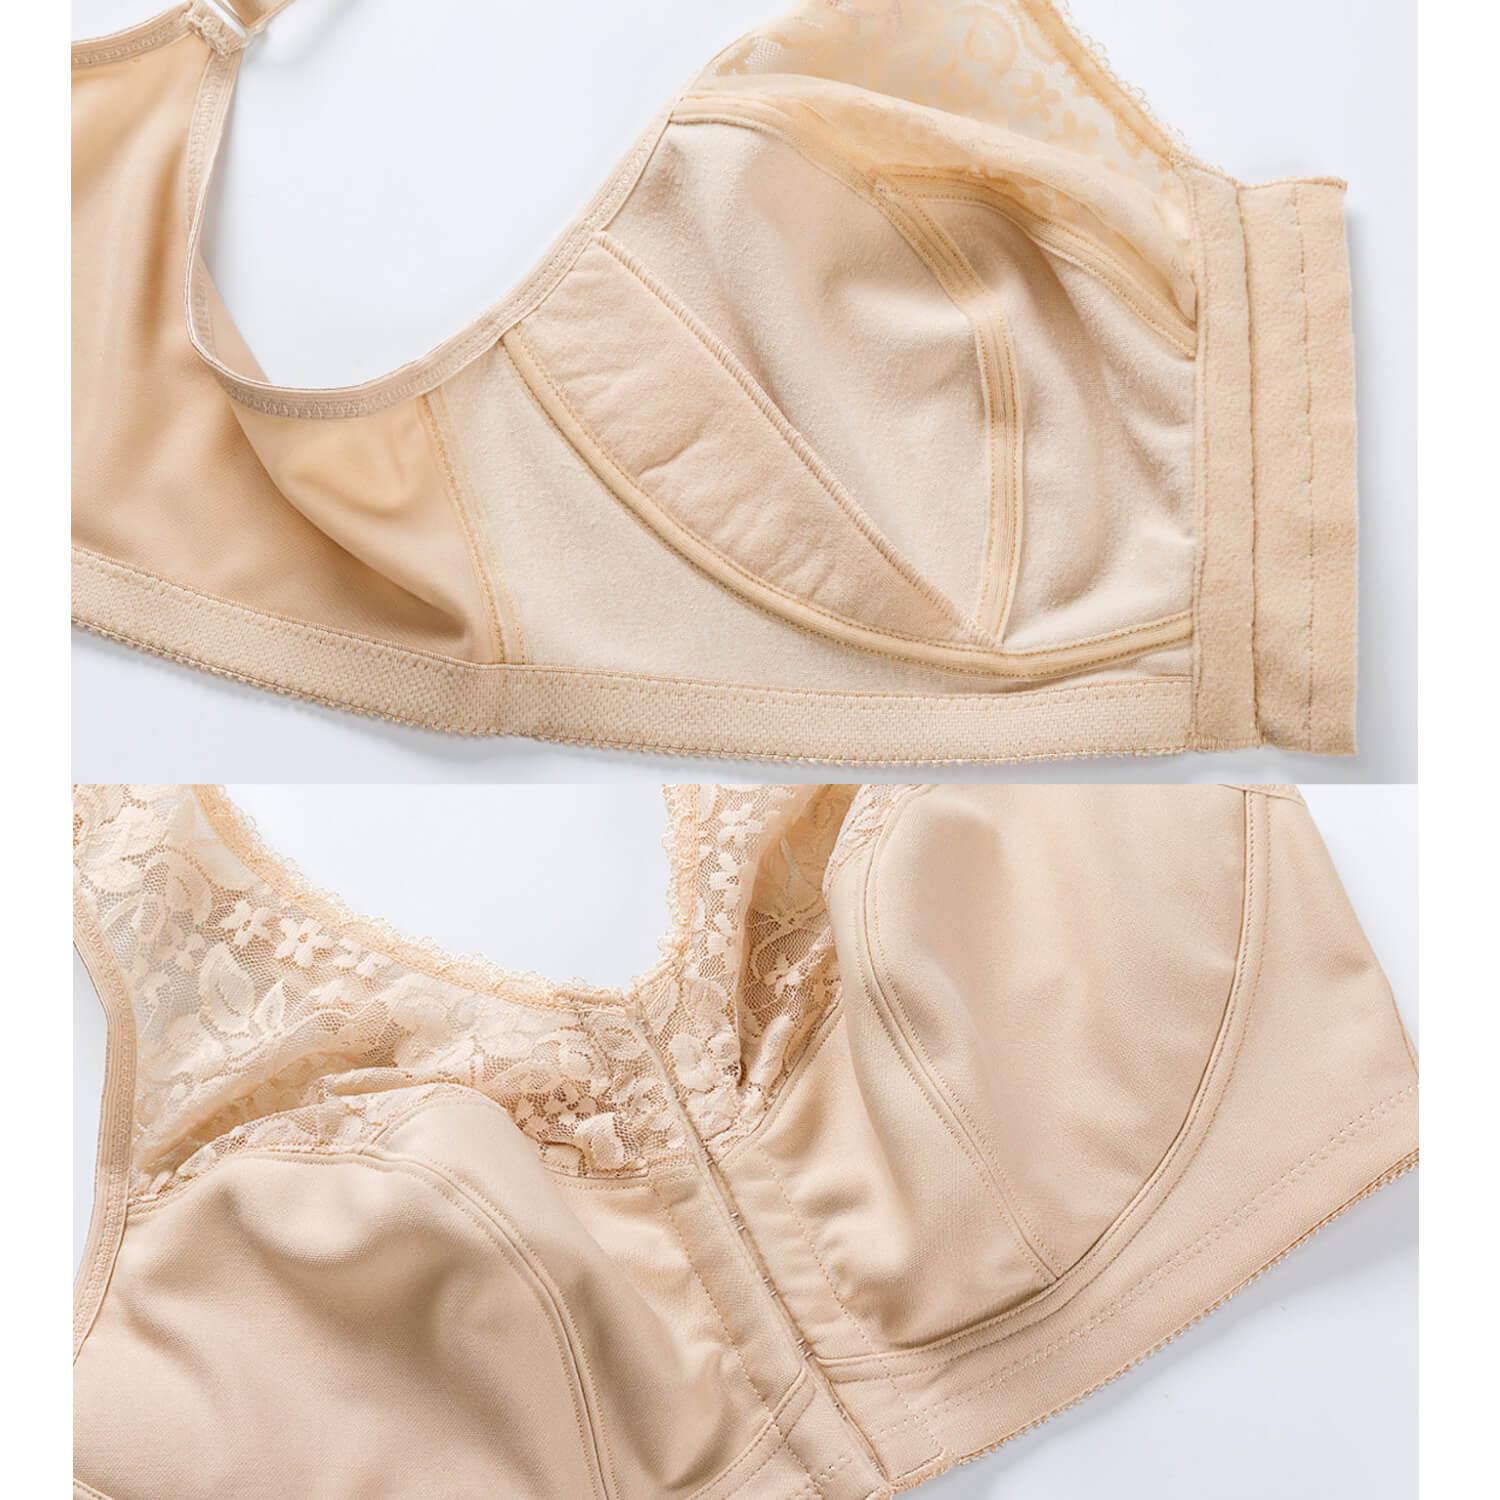 Wirefree Maternity Bras For Large Breasts – Okay Trendy